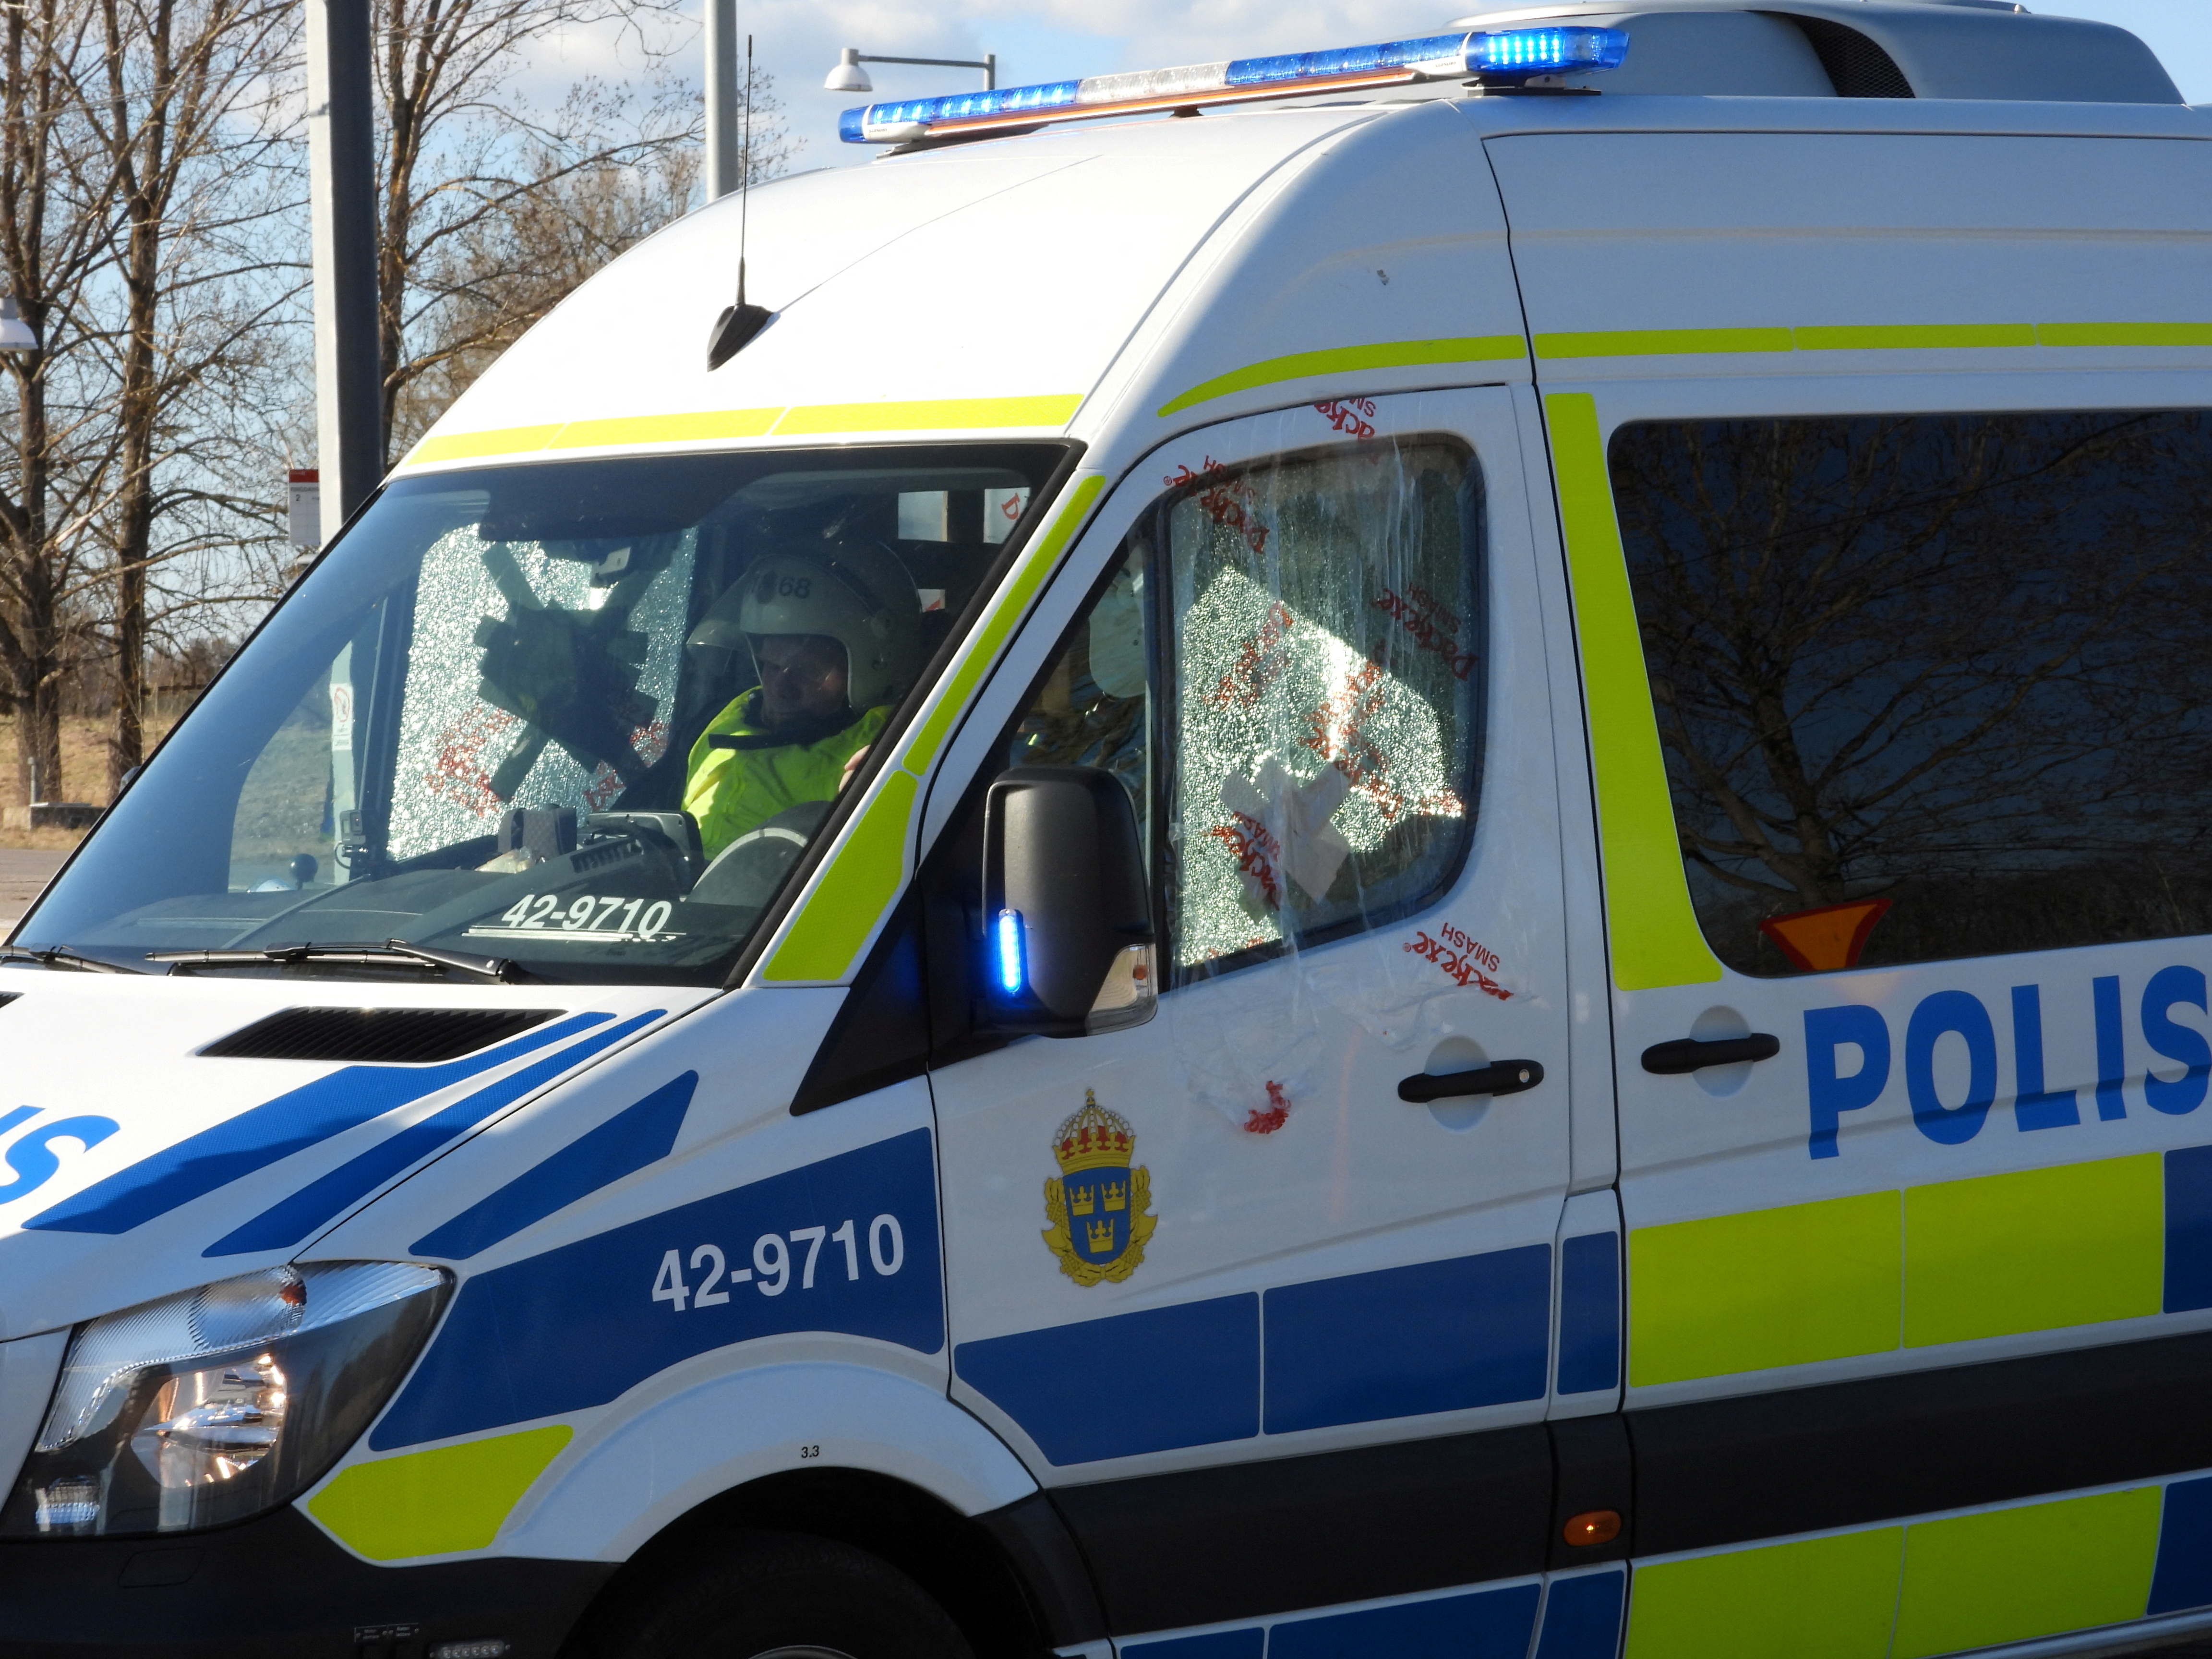 Riots in Sweden's Norrkoping ahead of right-wing extremist demonstration